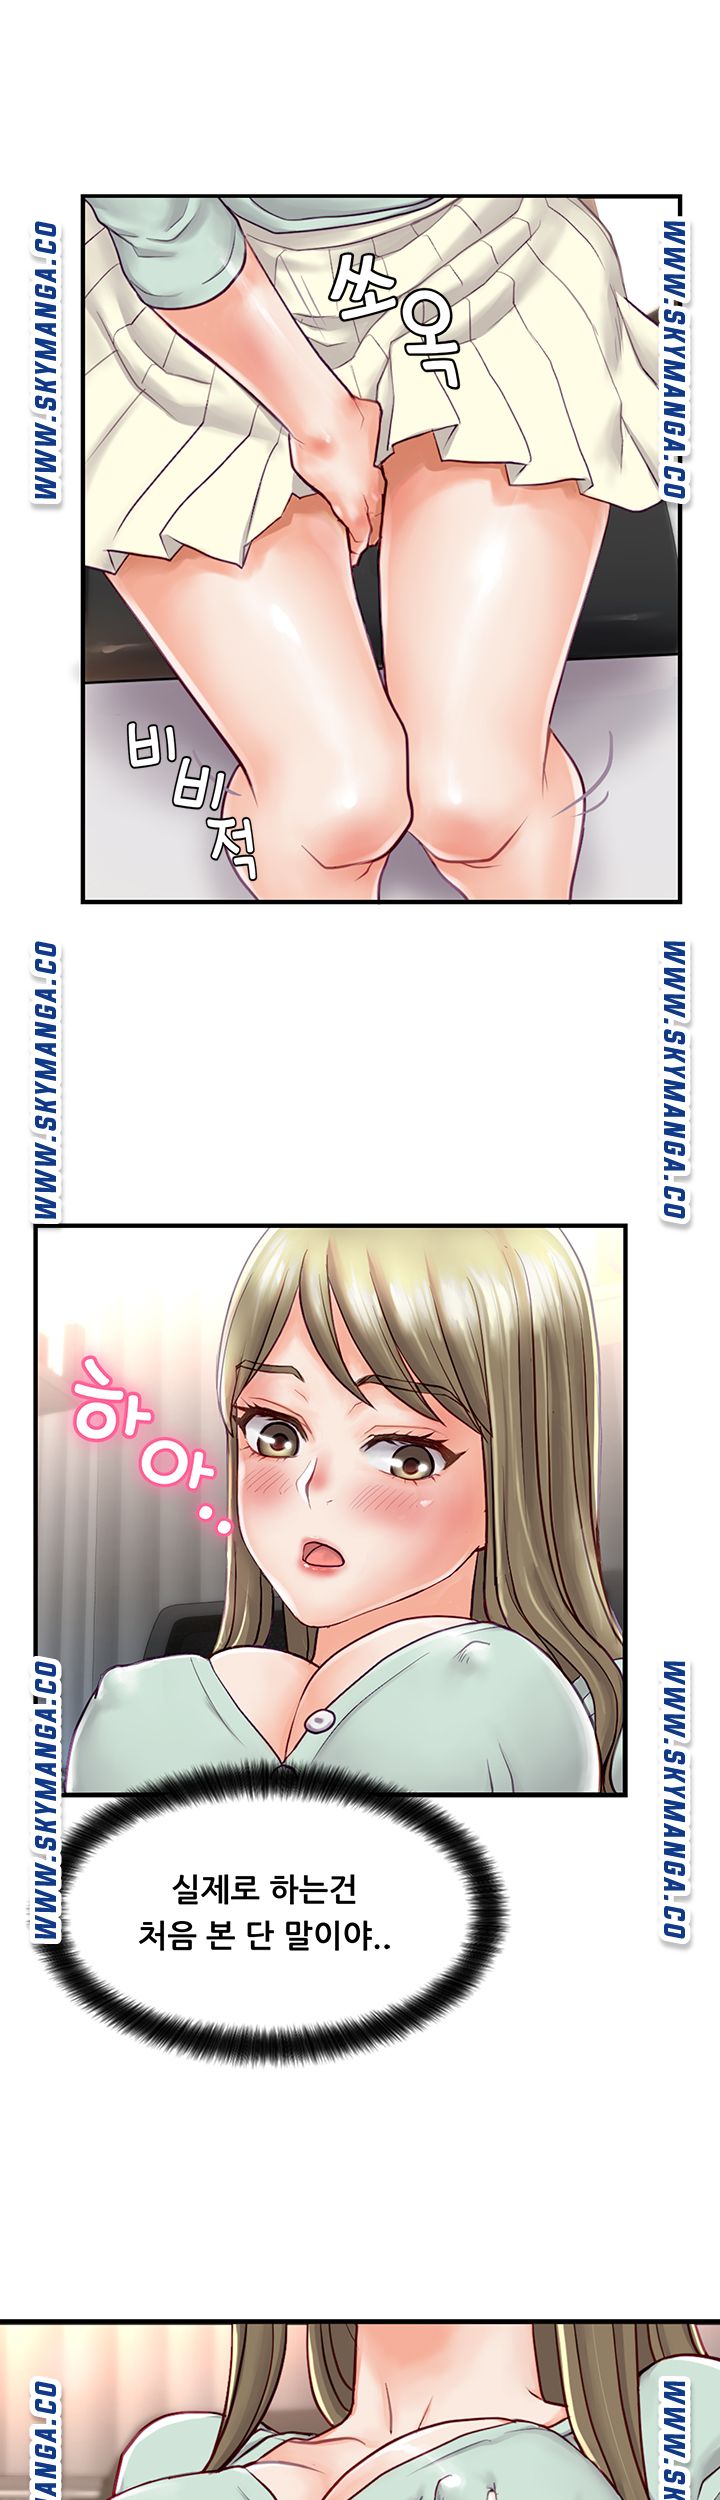 Broadcasting Club Raw - Chapter 1 Page 55